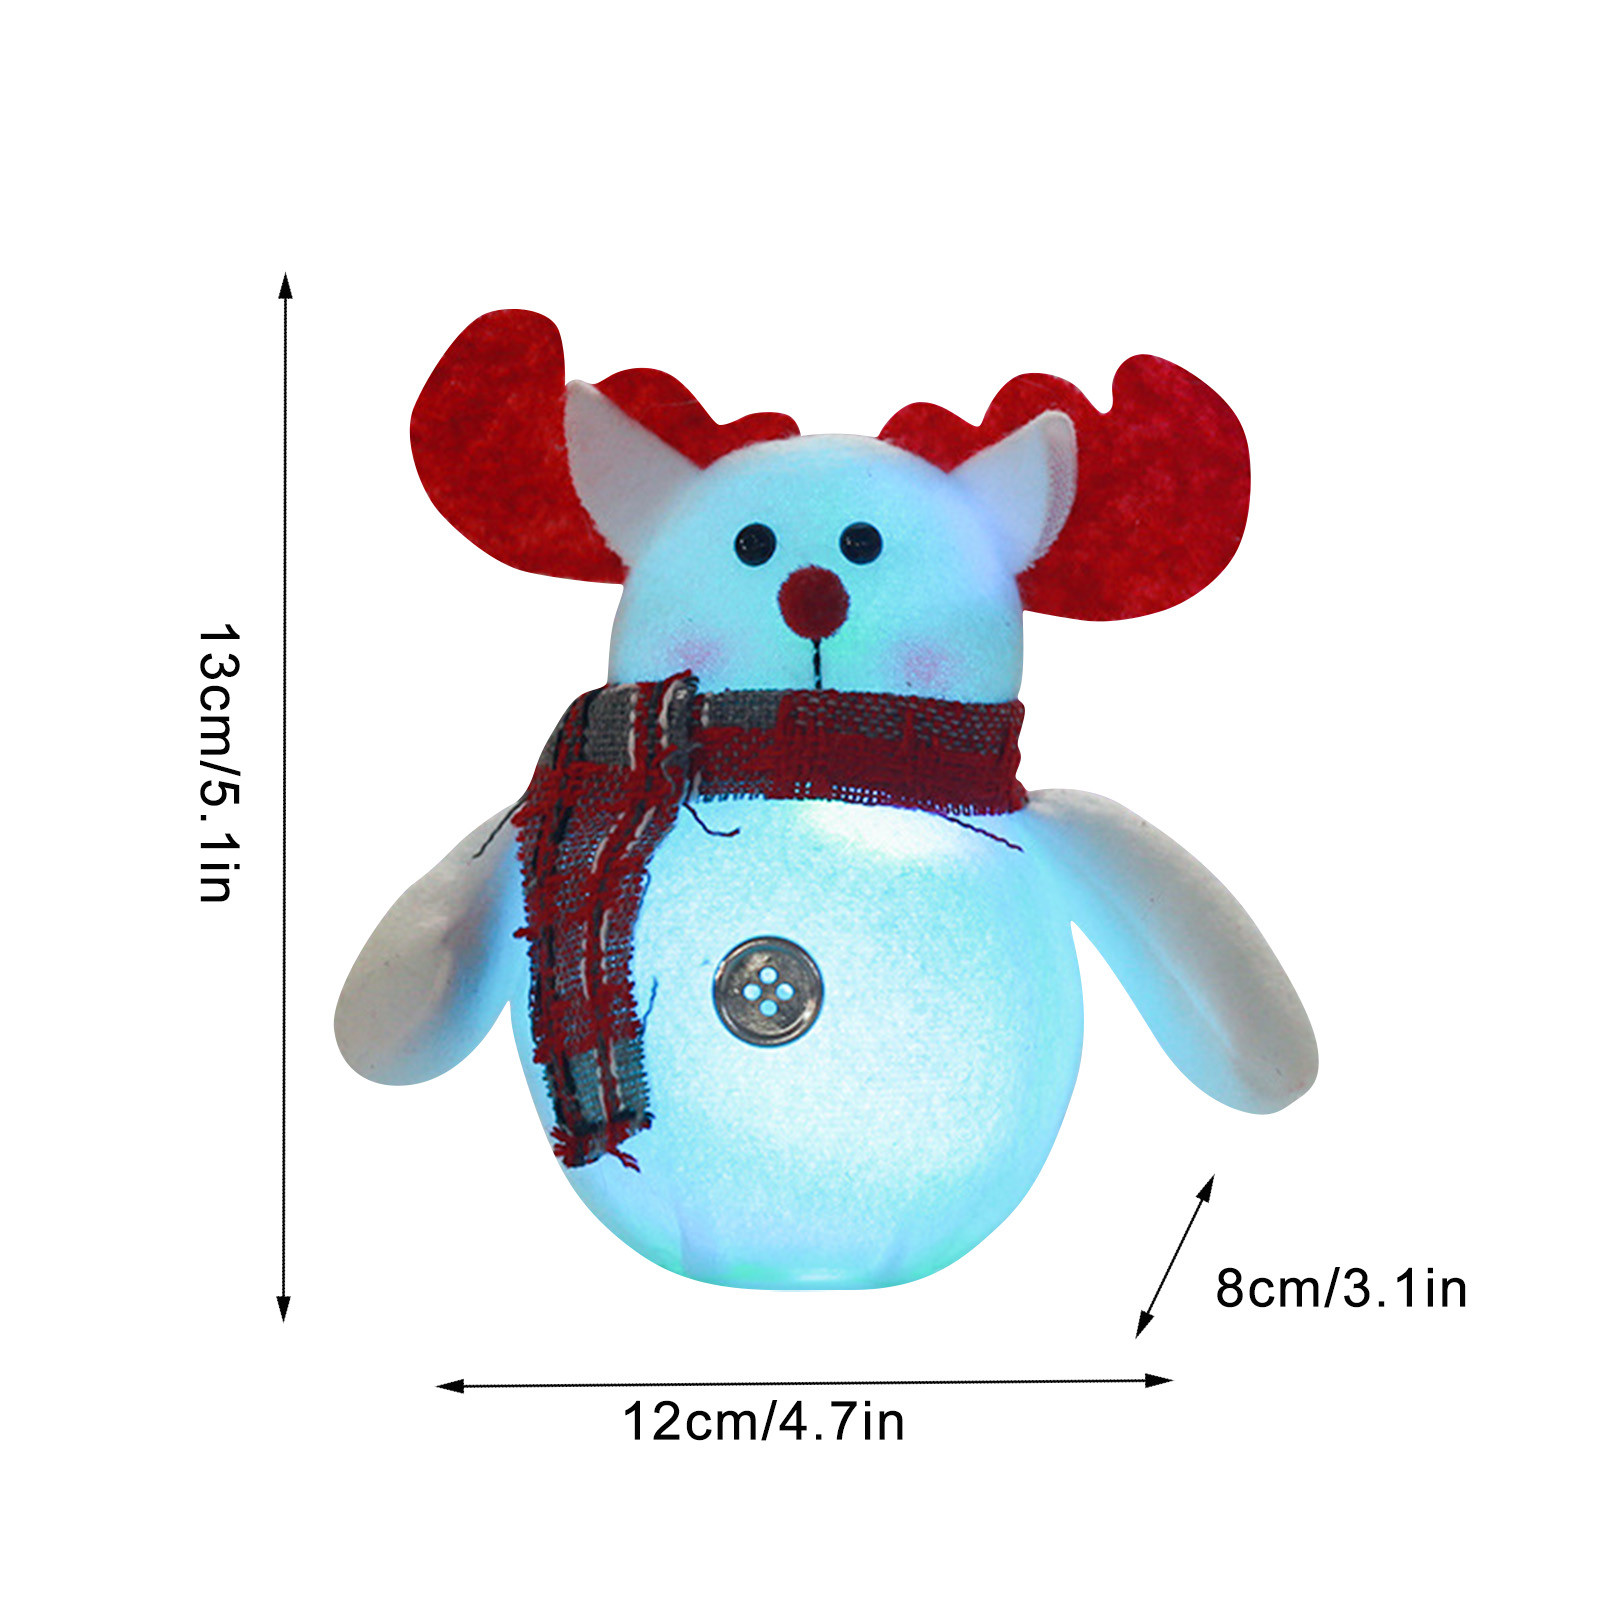 Ozmmyan 5 Year Old Girl Birthday Gift Ideas 1Pc Christmas Toys Glowing  Llittle Snowman Christmas Tree Pendant Ornaments Fall Decorations For Home